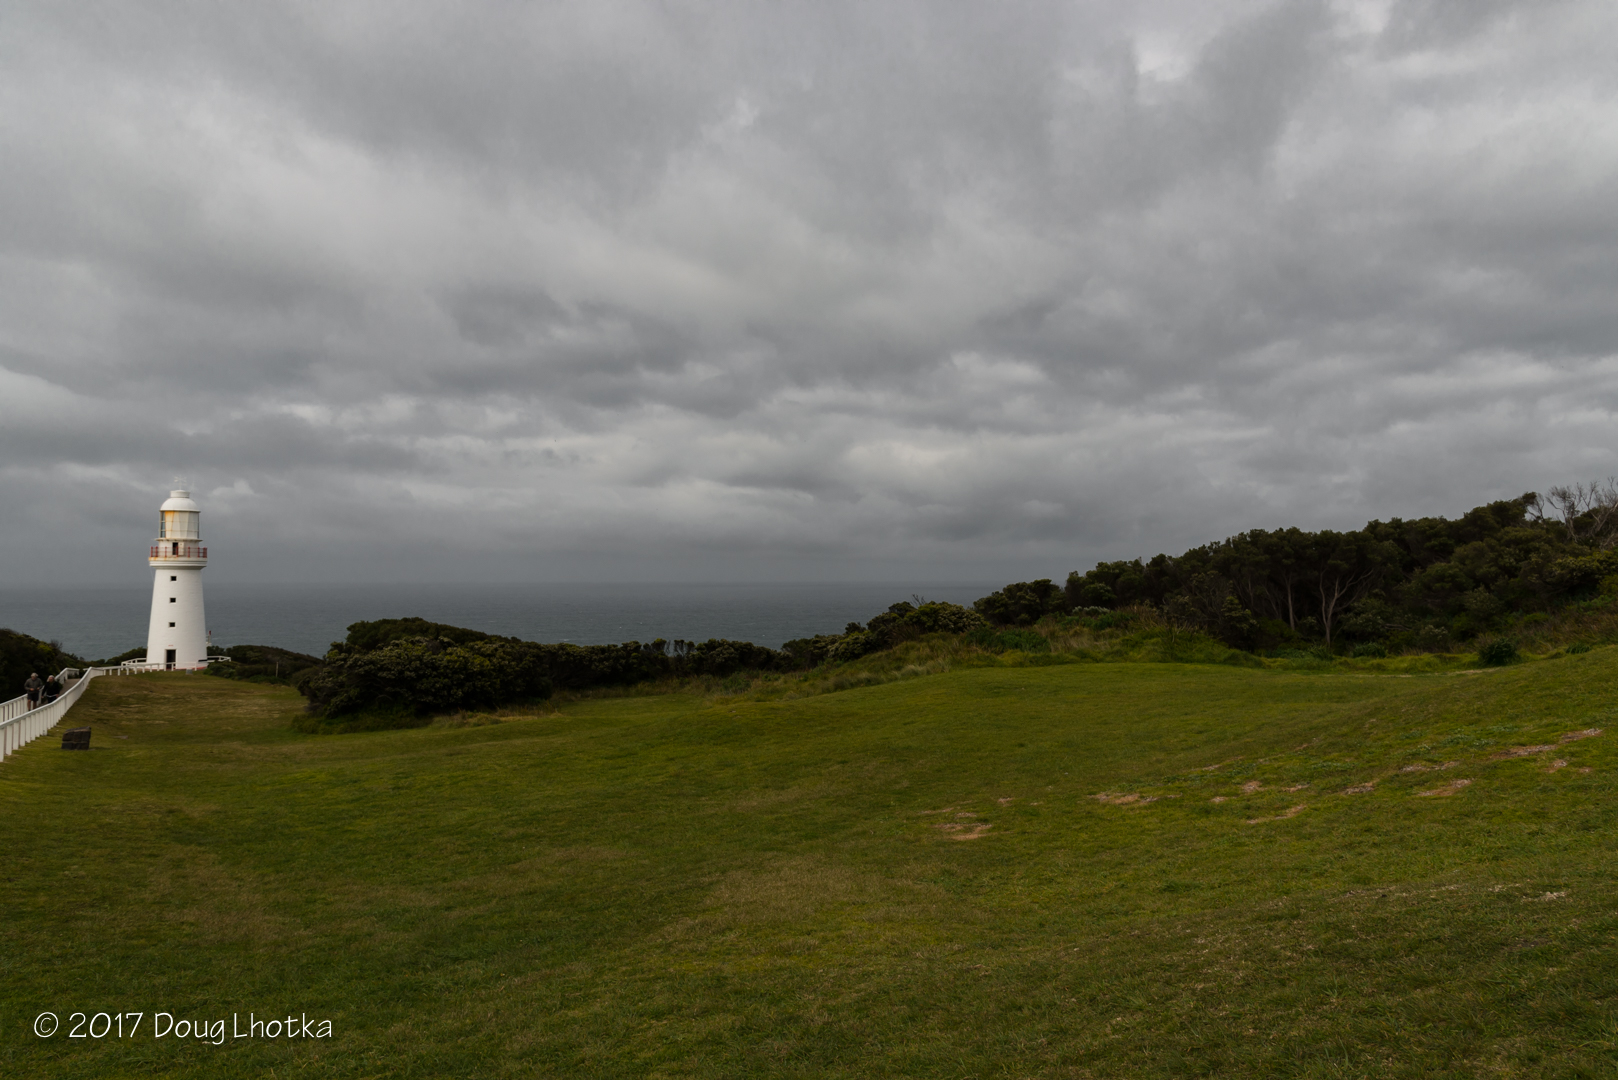 Friday Photo - Ready for the Storm: Cape Otway Lighthouse